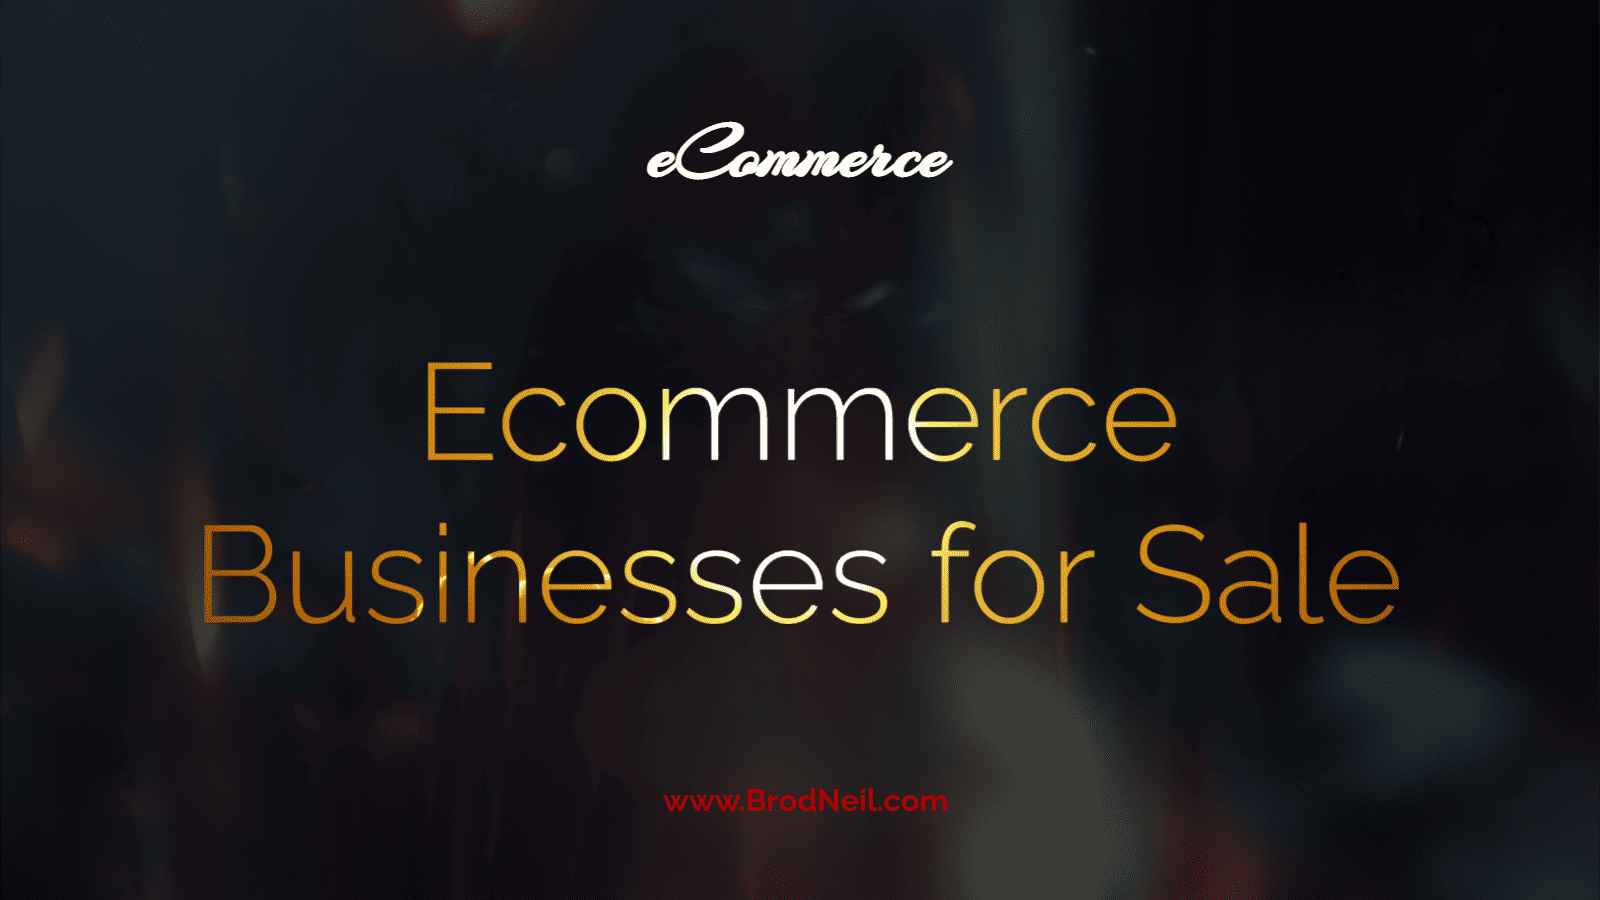 Ecommerce businesses for sale